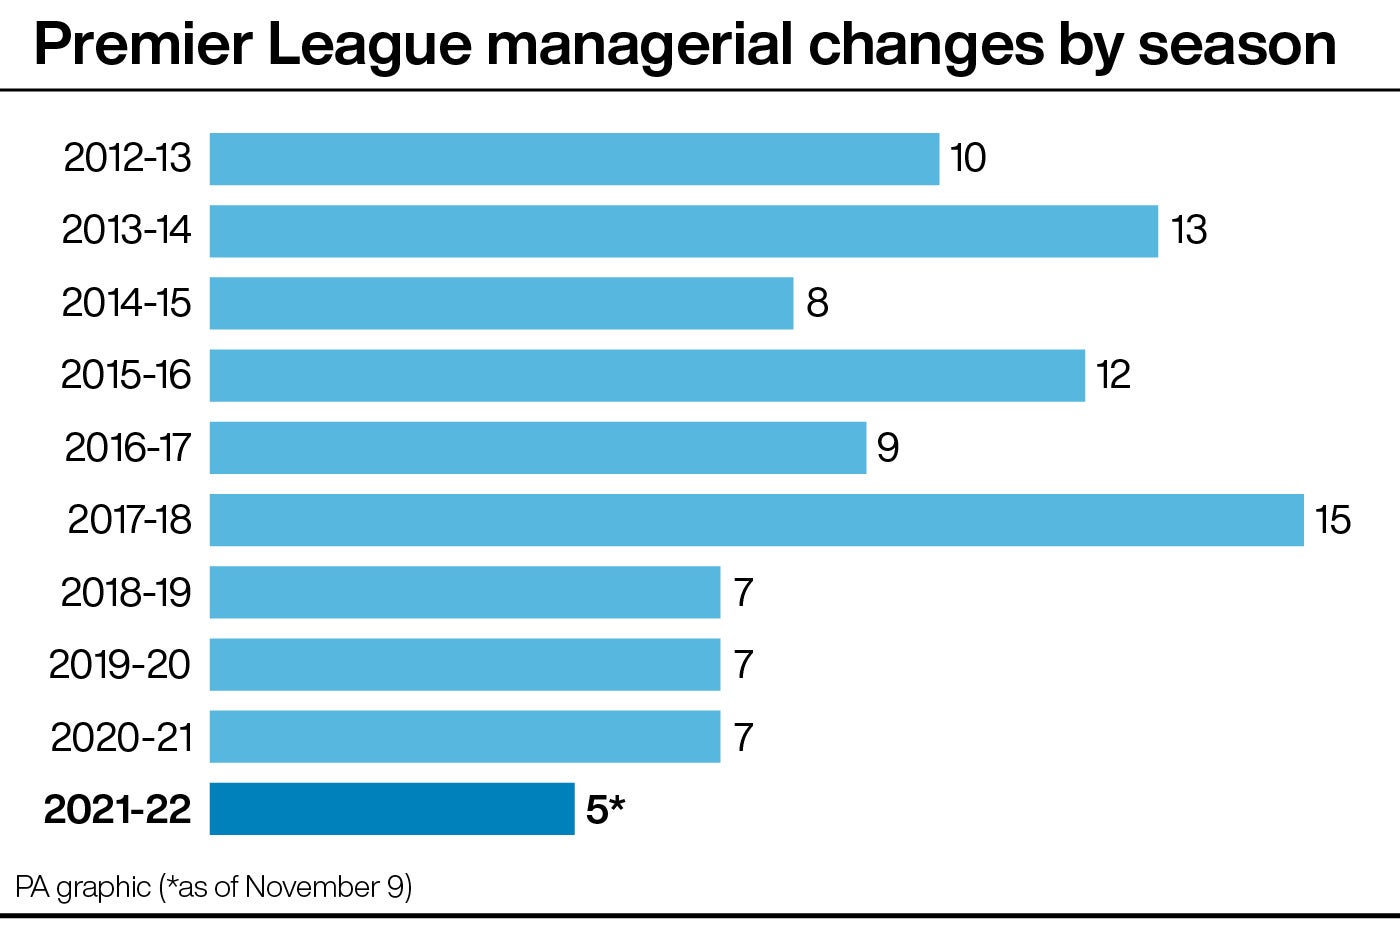 This season is already closing on the previous three in terms of Premier League managerial departures (PA graphic)